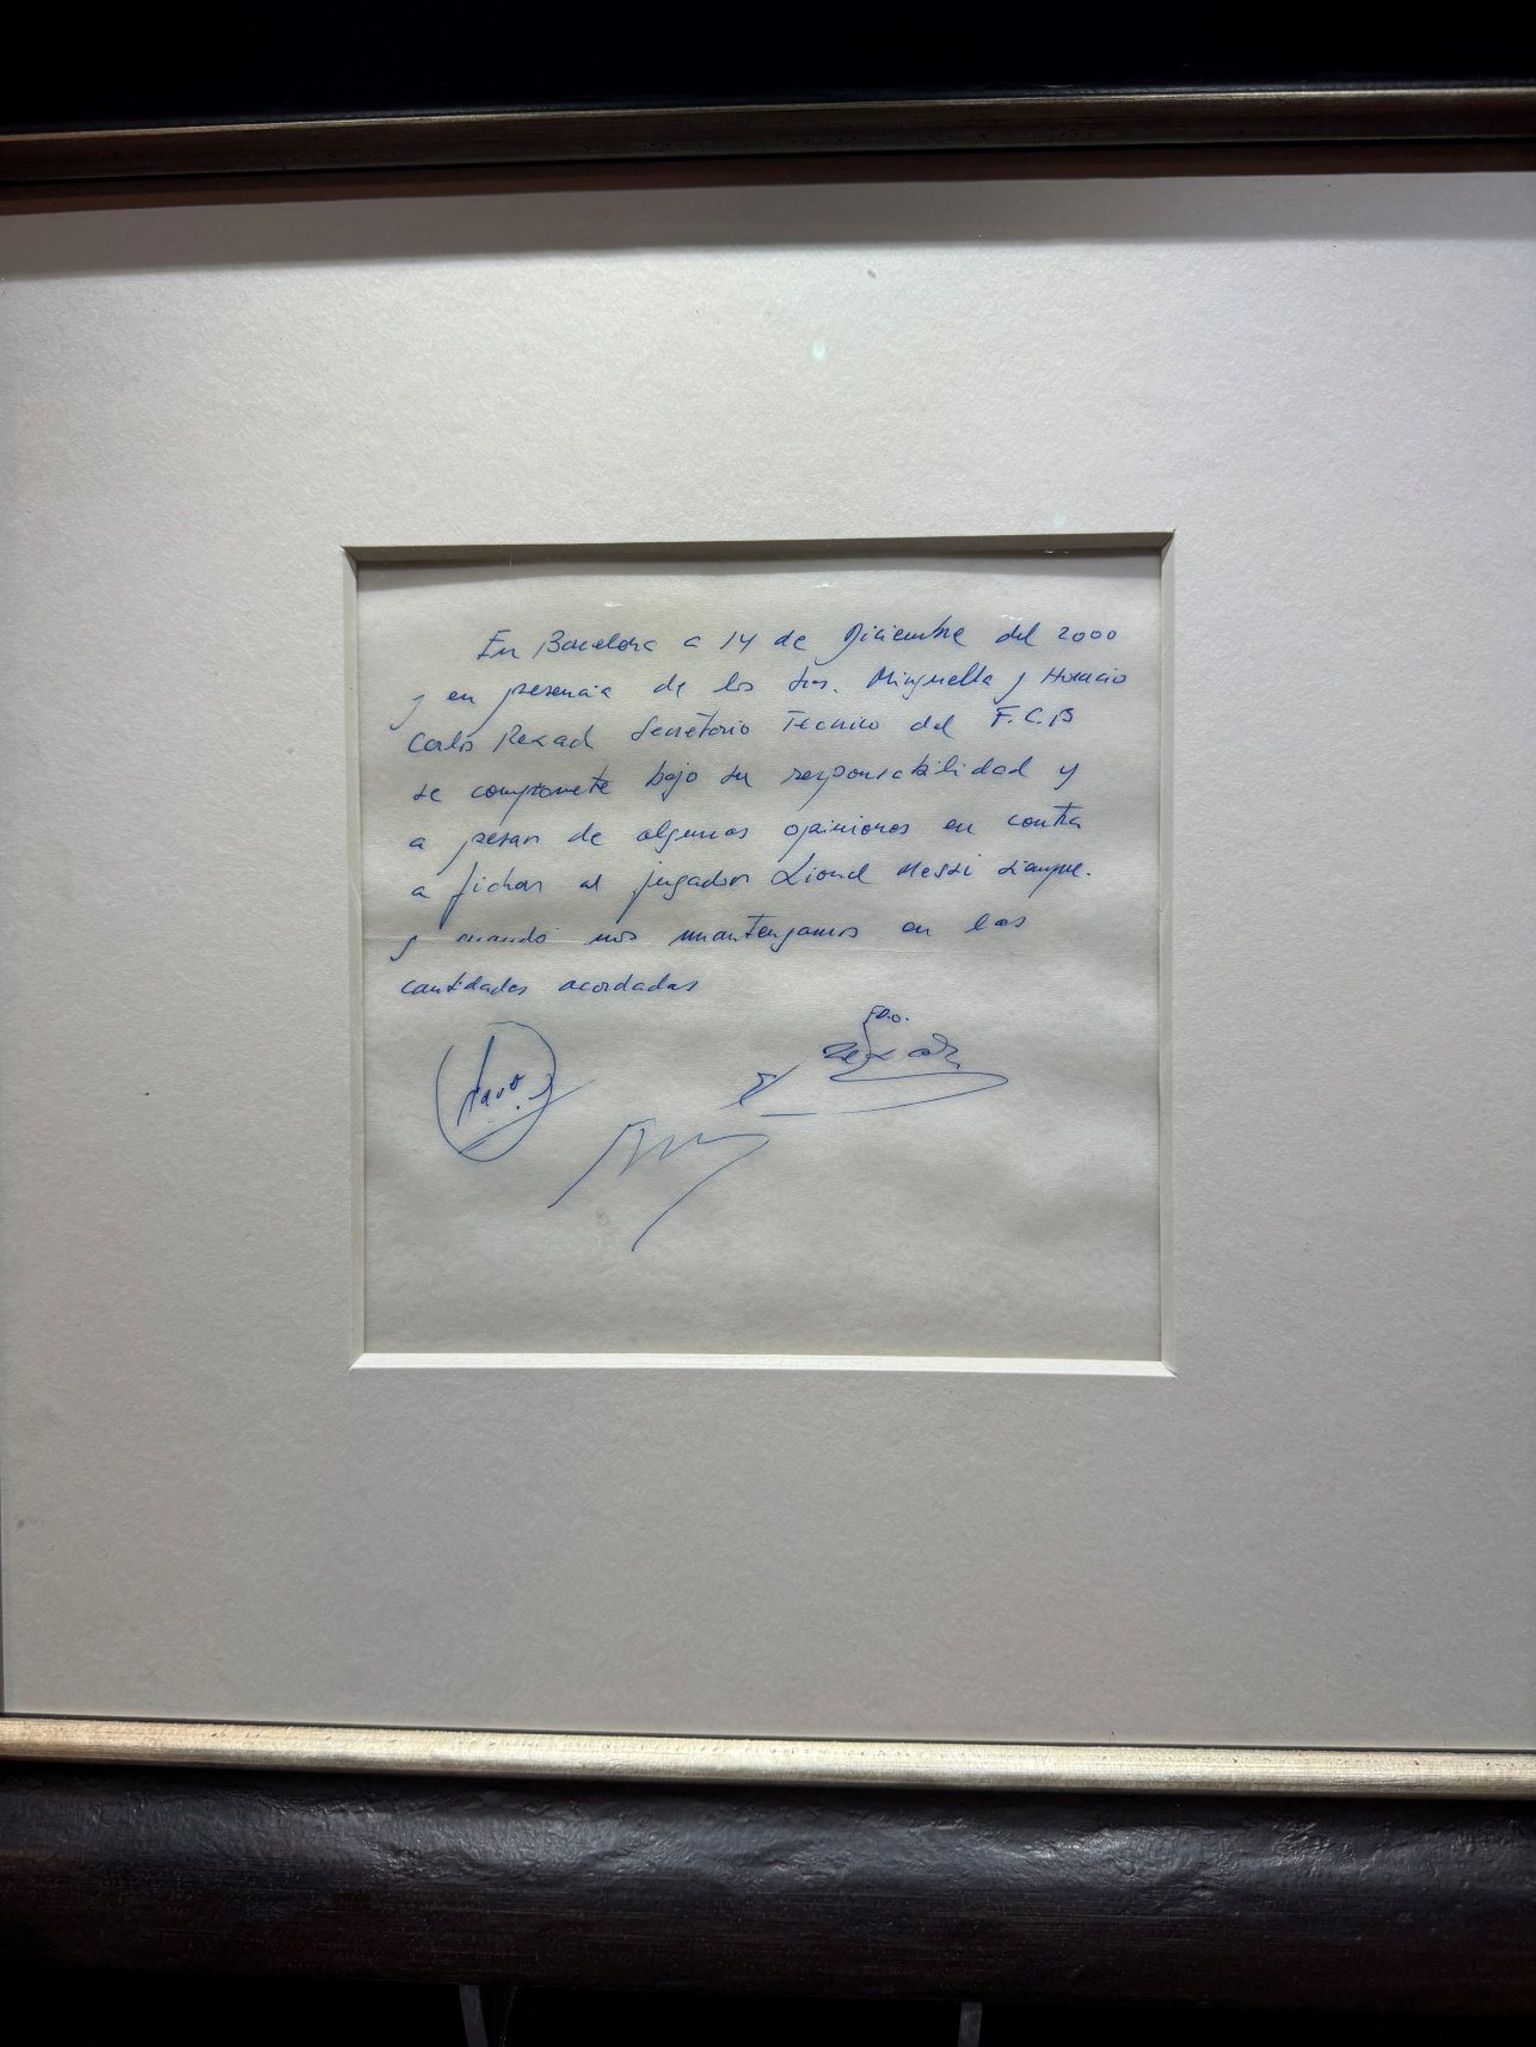 Signed and framed napkin on which Barcelona promised to sign a 13-year-old Lionel Messi